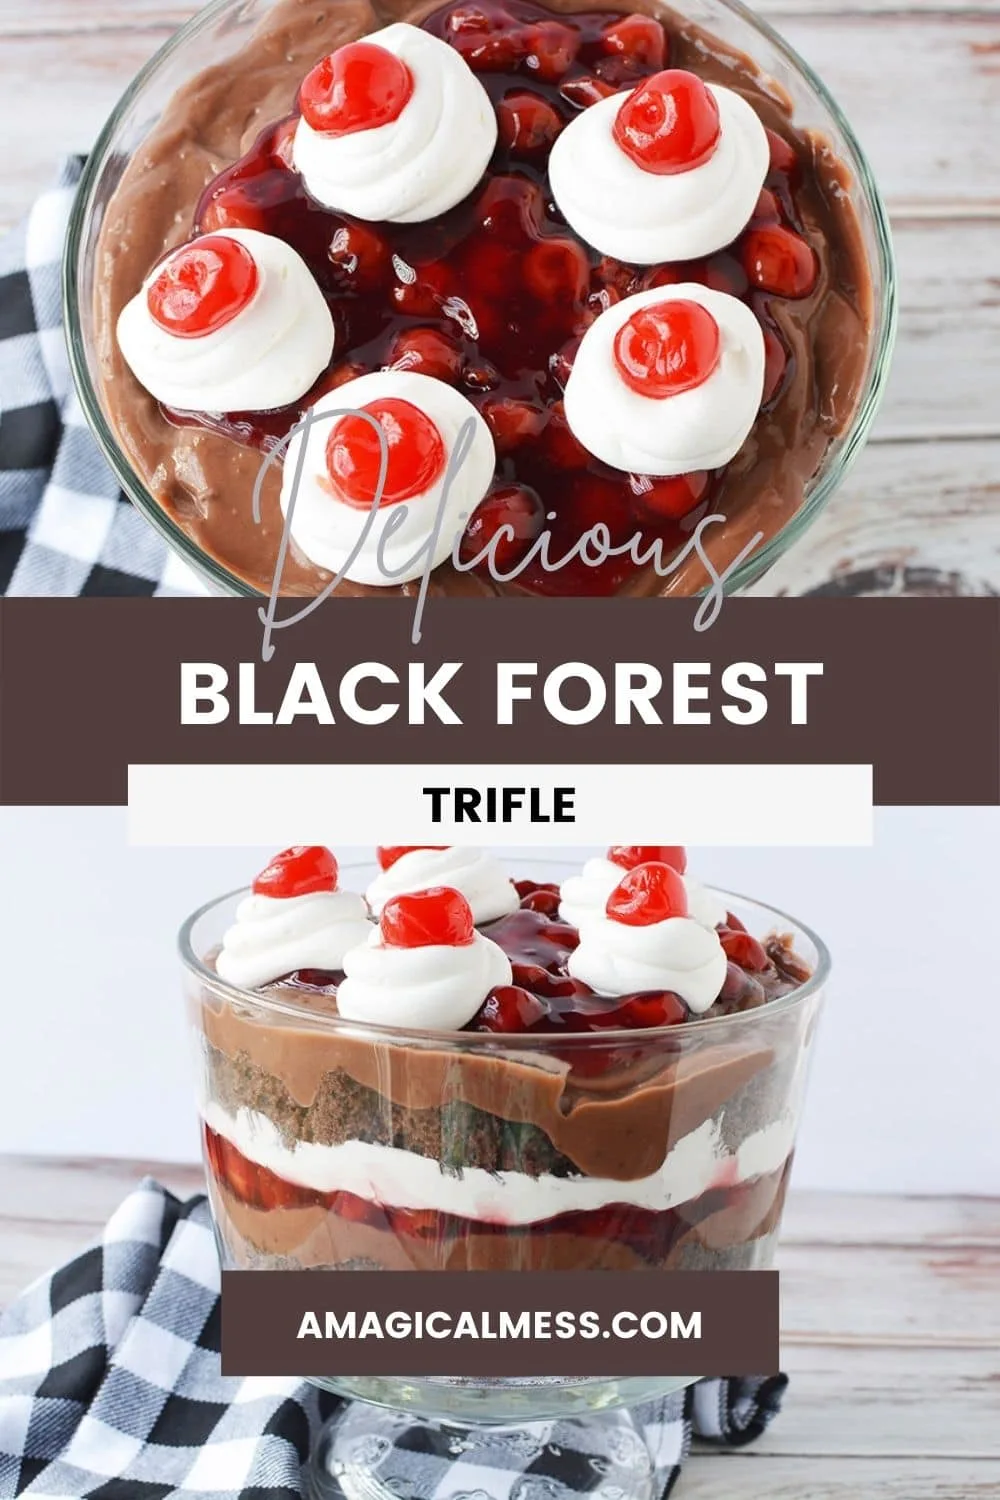 Top of a trifle topped with cherries and black forest trifle in a bowl.